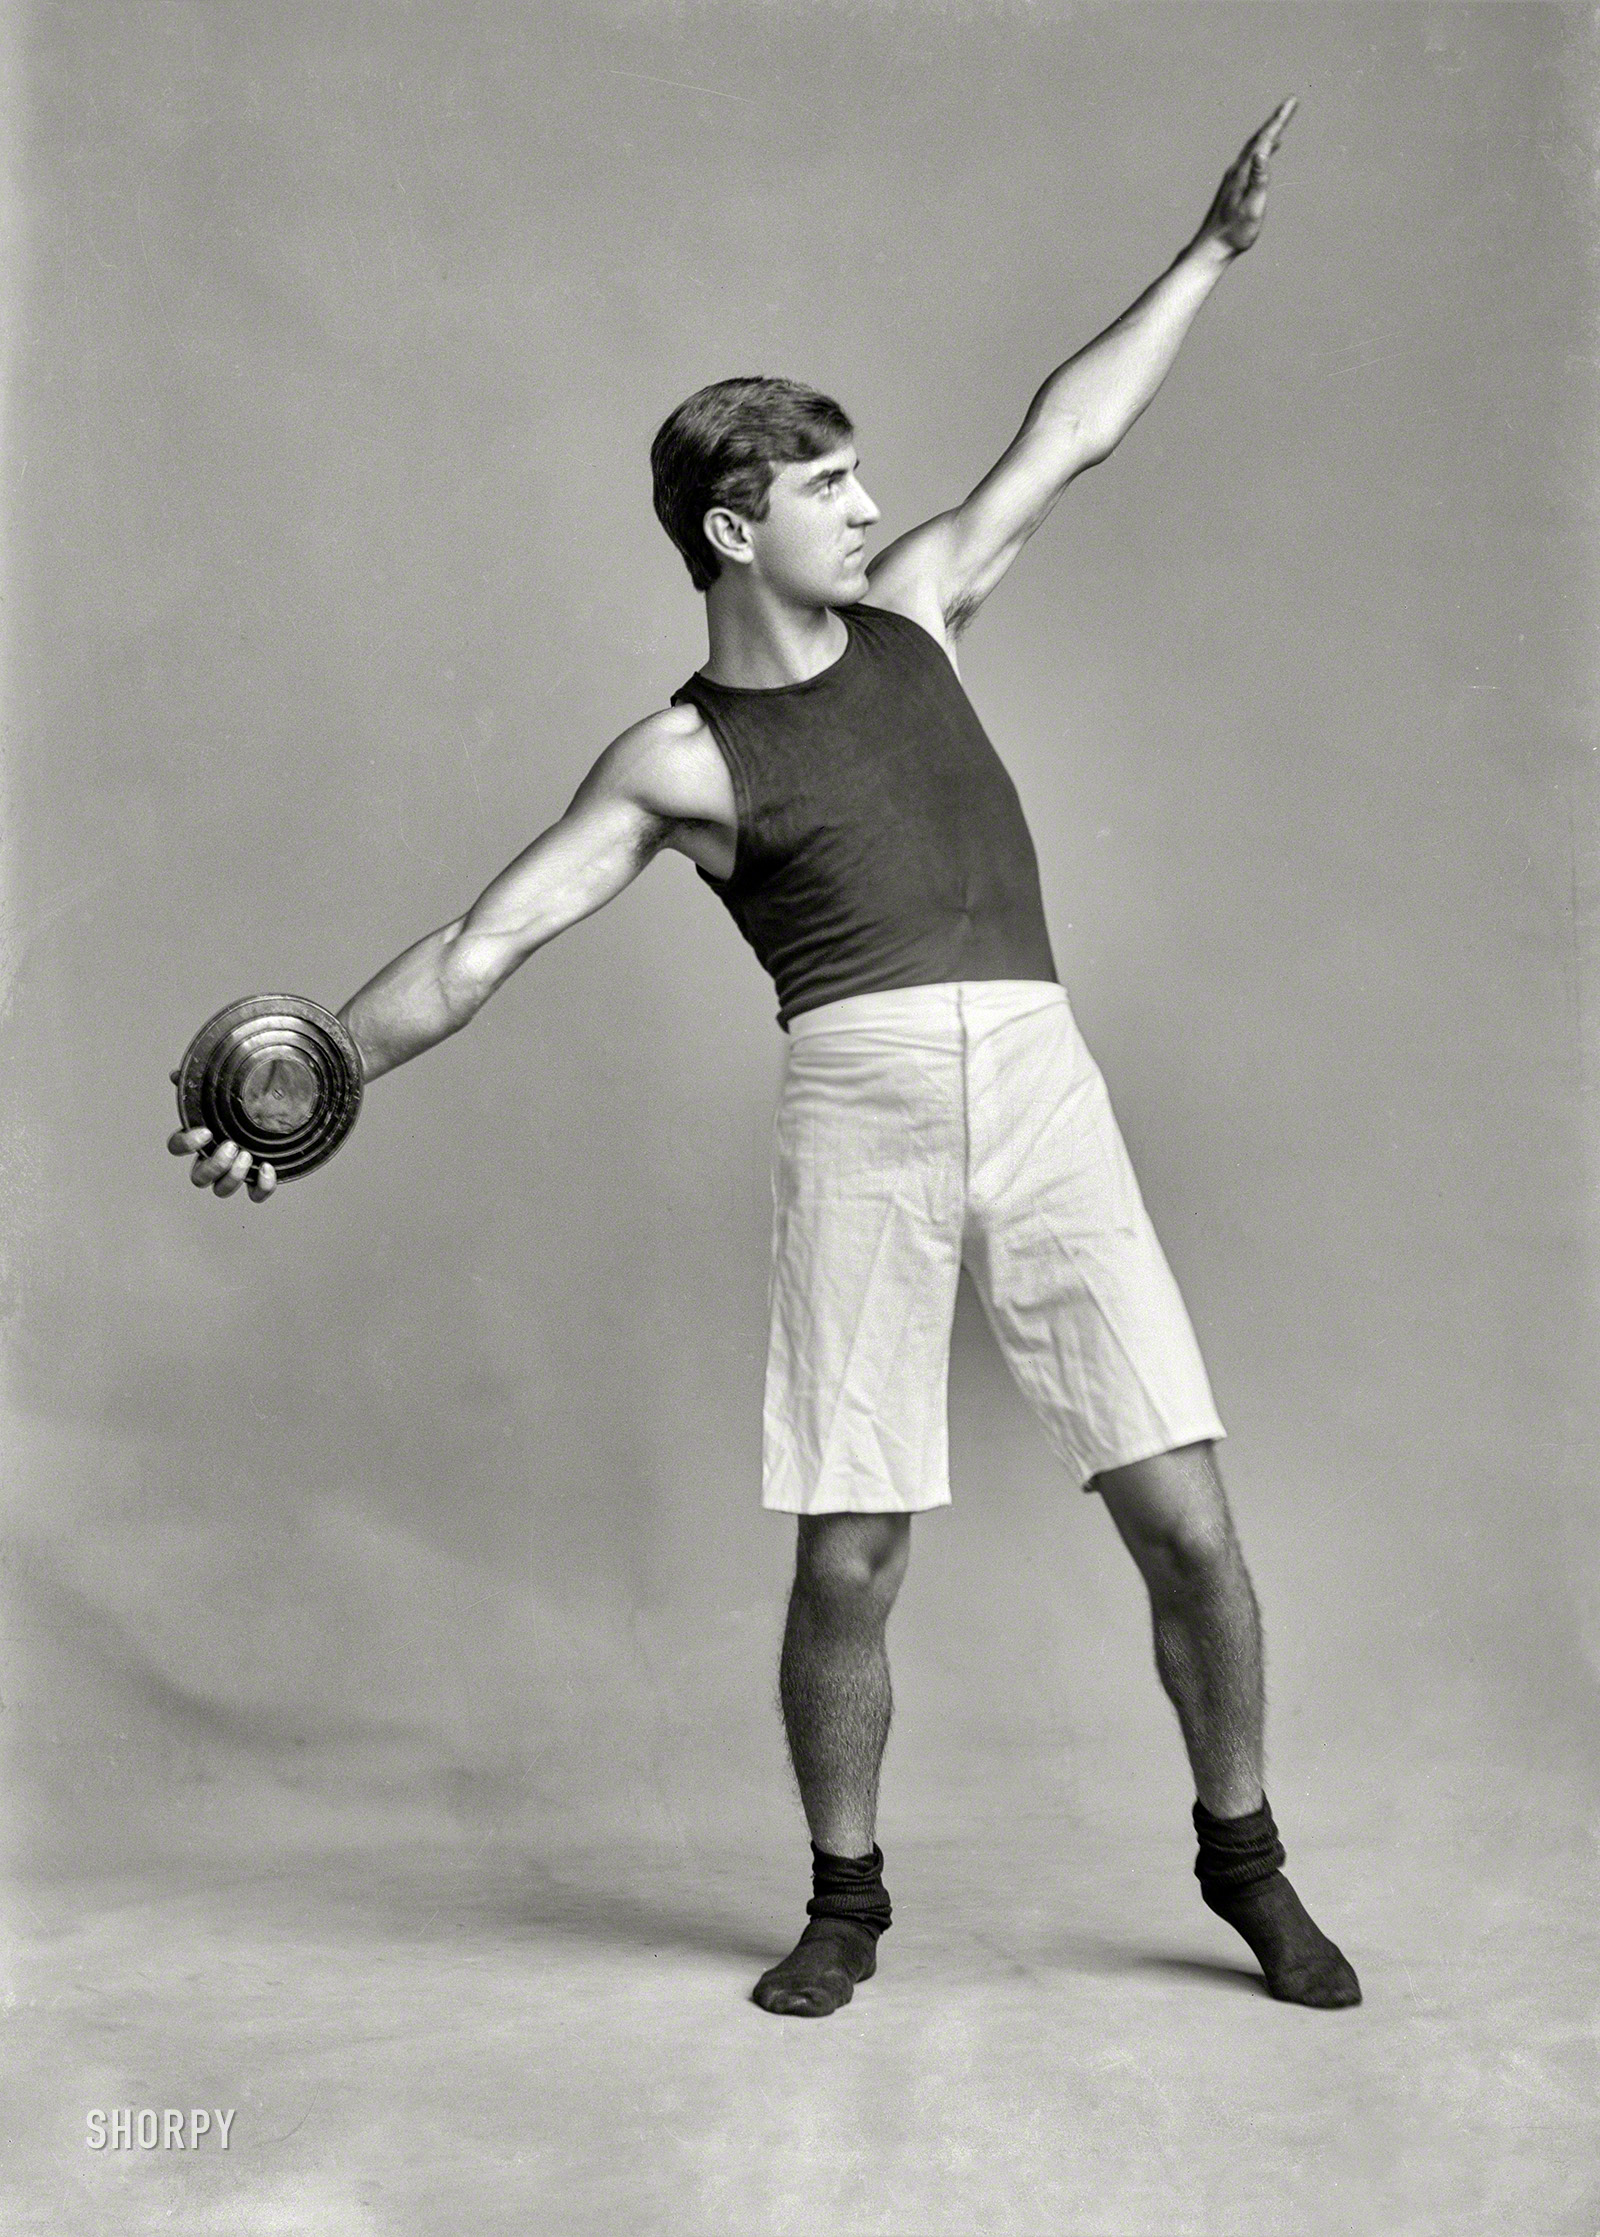 Washington, D.C., circa 1905. "A.C. Duganne, Technical High School." Track and field athlete Alfred C. "Duke" Duganne (1887-1964). 5x7 glass negative from the C.M. Bell portrait studio. View full size.